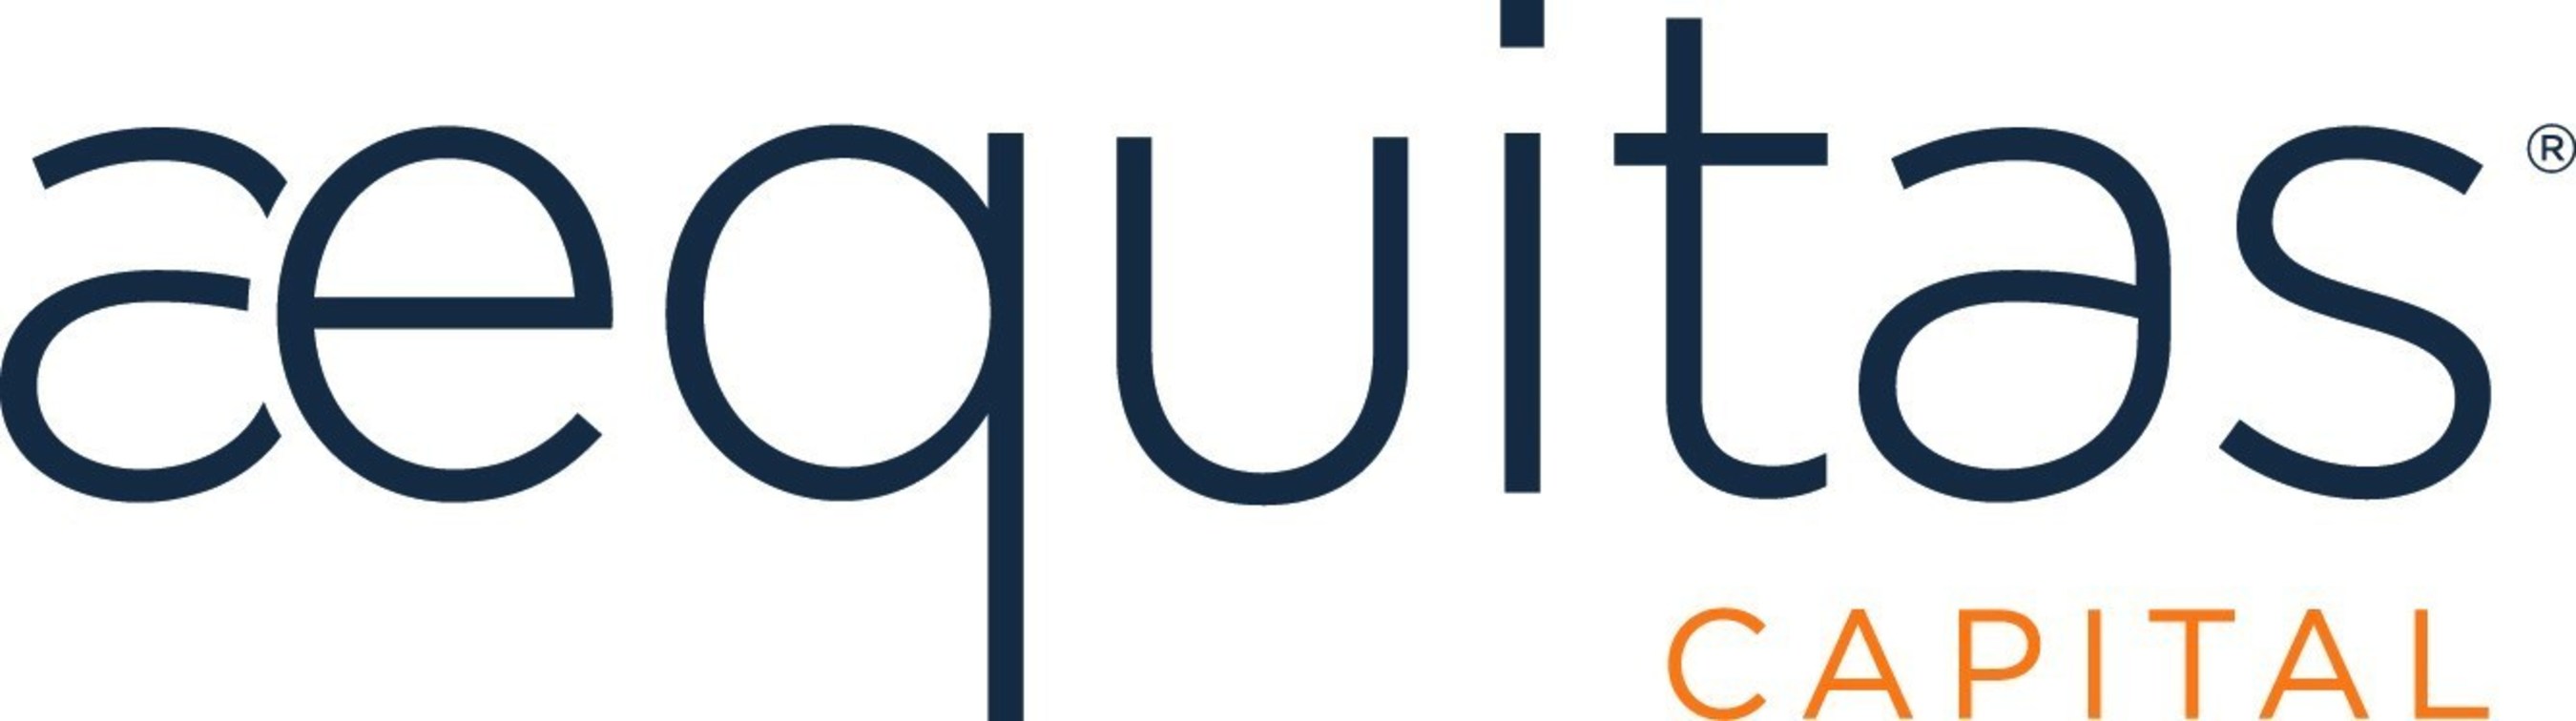 Aequitas Capital is an alternative investment management company dedicated to innovation, discipline, and excellence. With proven expertise in finance, management, and technology, and a focus on undervalued, high-yielding strategies, Aequitas sources, structures, and implements Private Credit and Private Equity solutions, benefiting the institutions and high-net-worth clients that trust us as a valuable investment partner. Please visit www.aequitascapital.com (PRNewsFoto/Aequitas Capital) (PRNewsFoto/Aequitas Capital)